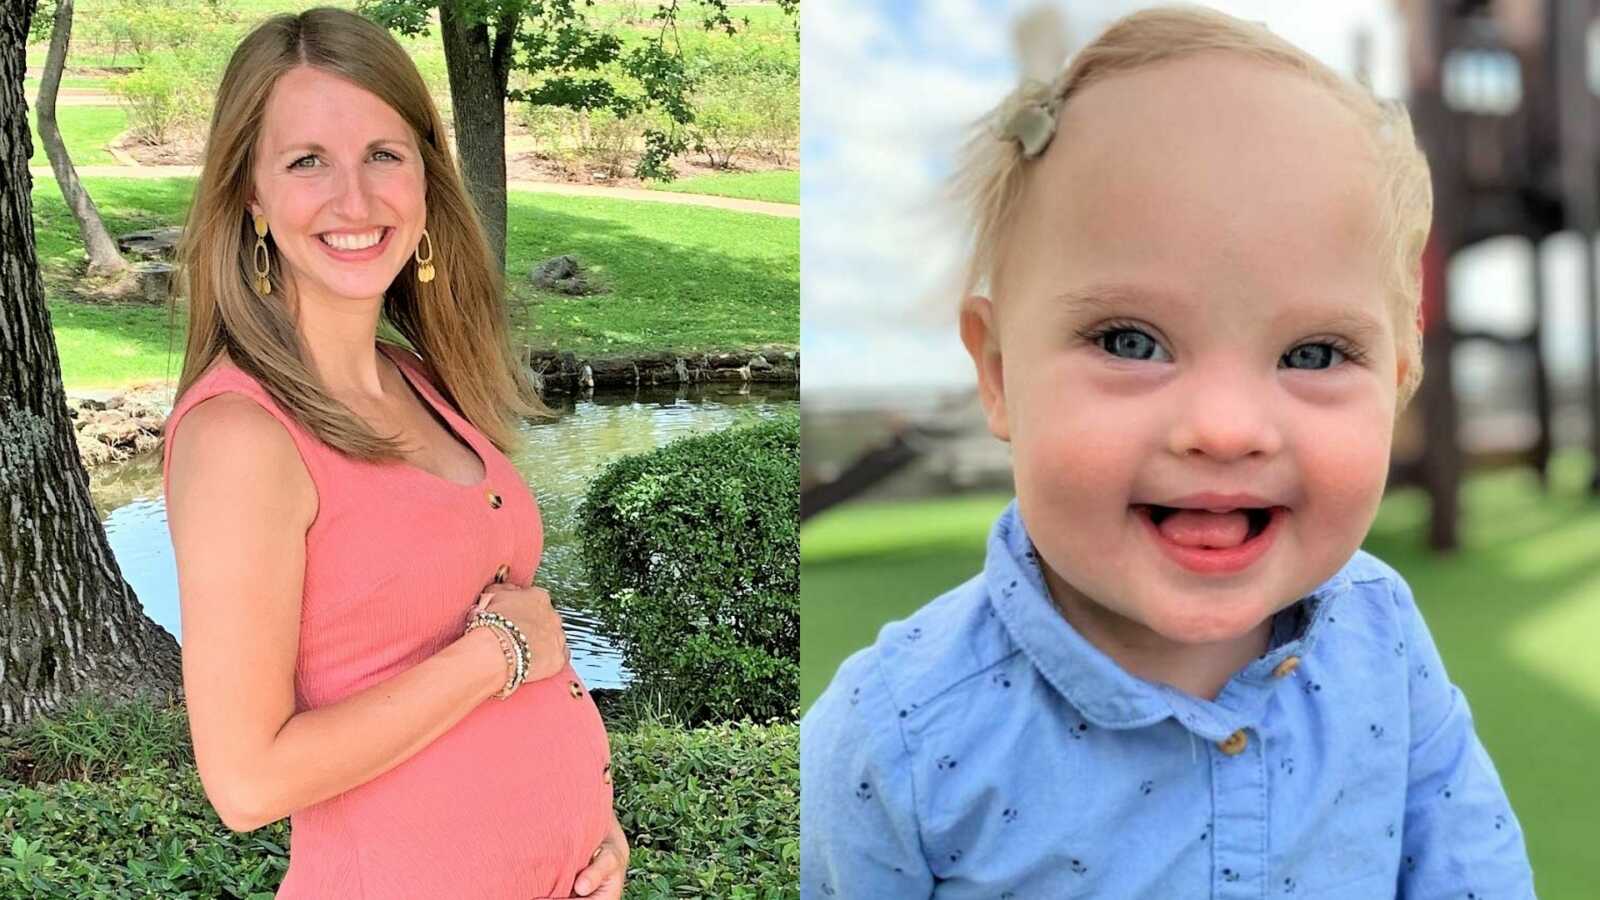 On the left, pregnant woman holds her stomach while wearing pink dress. On the right, baby girl with Down Syndrome smiles at the camera.